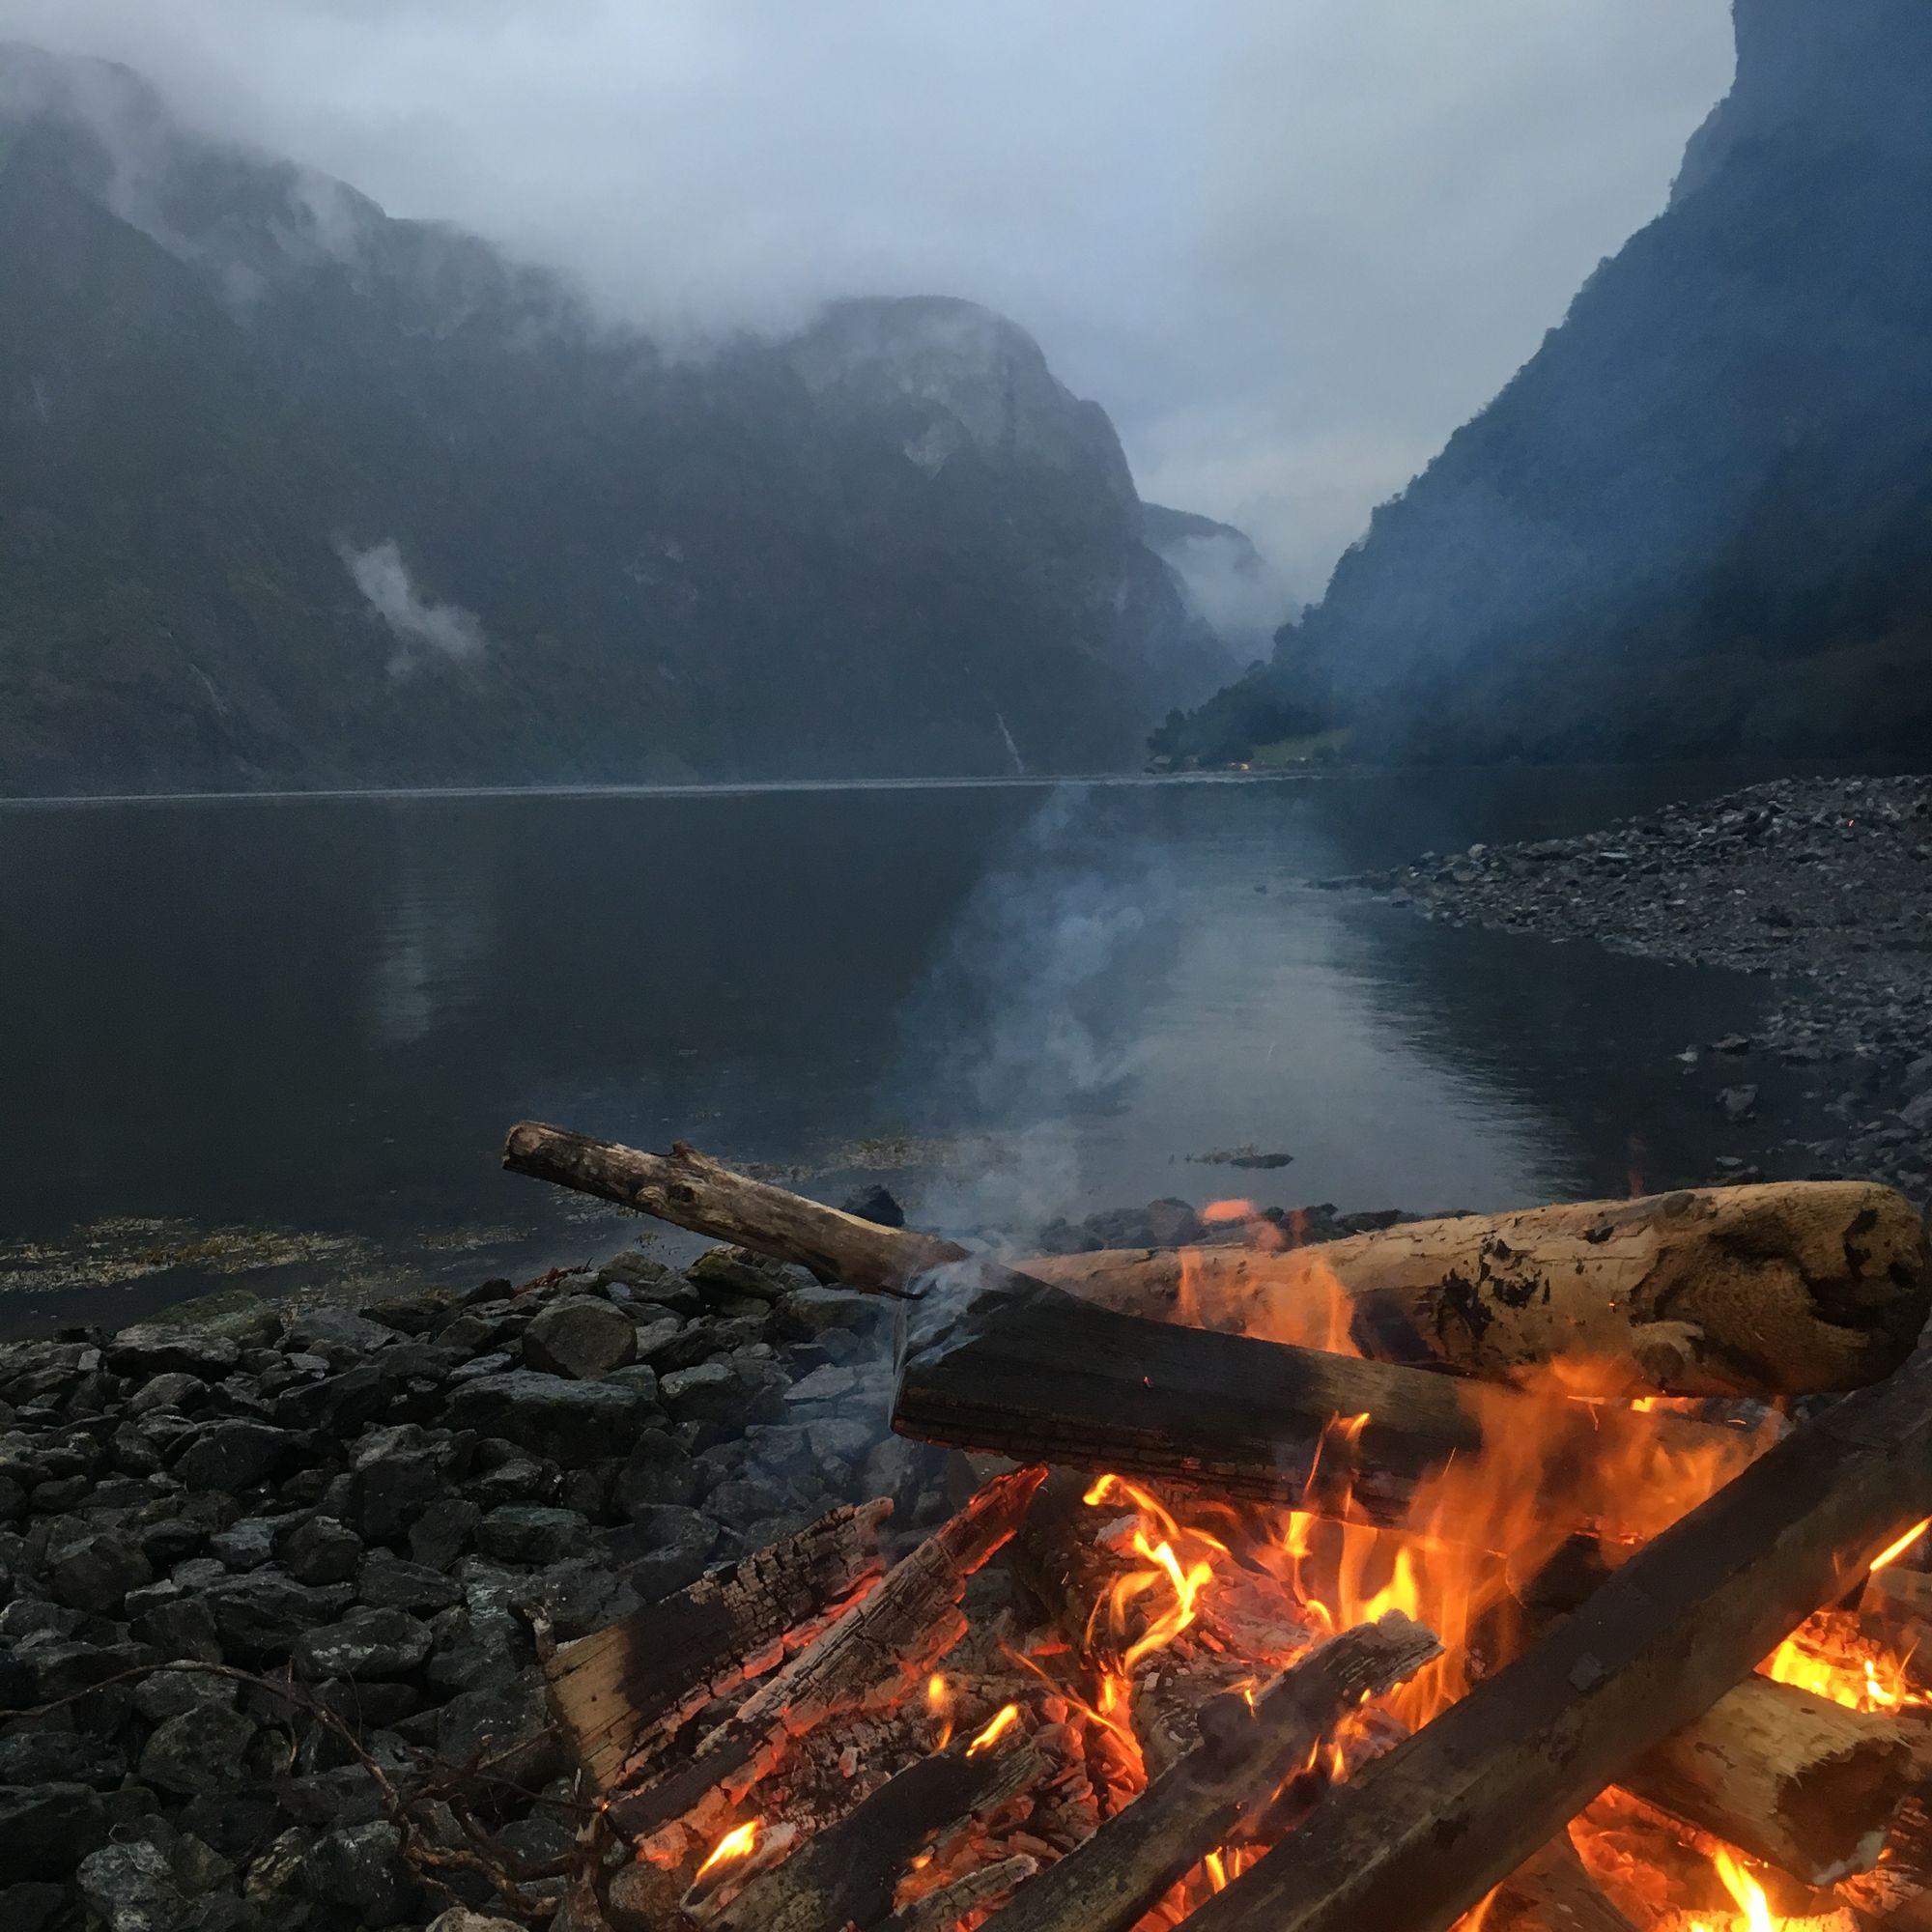 A campfire on the edge of a Norwegian fjord.